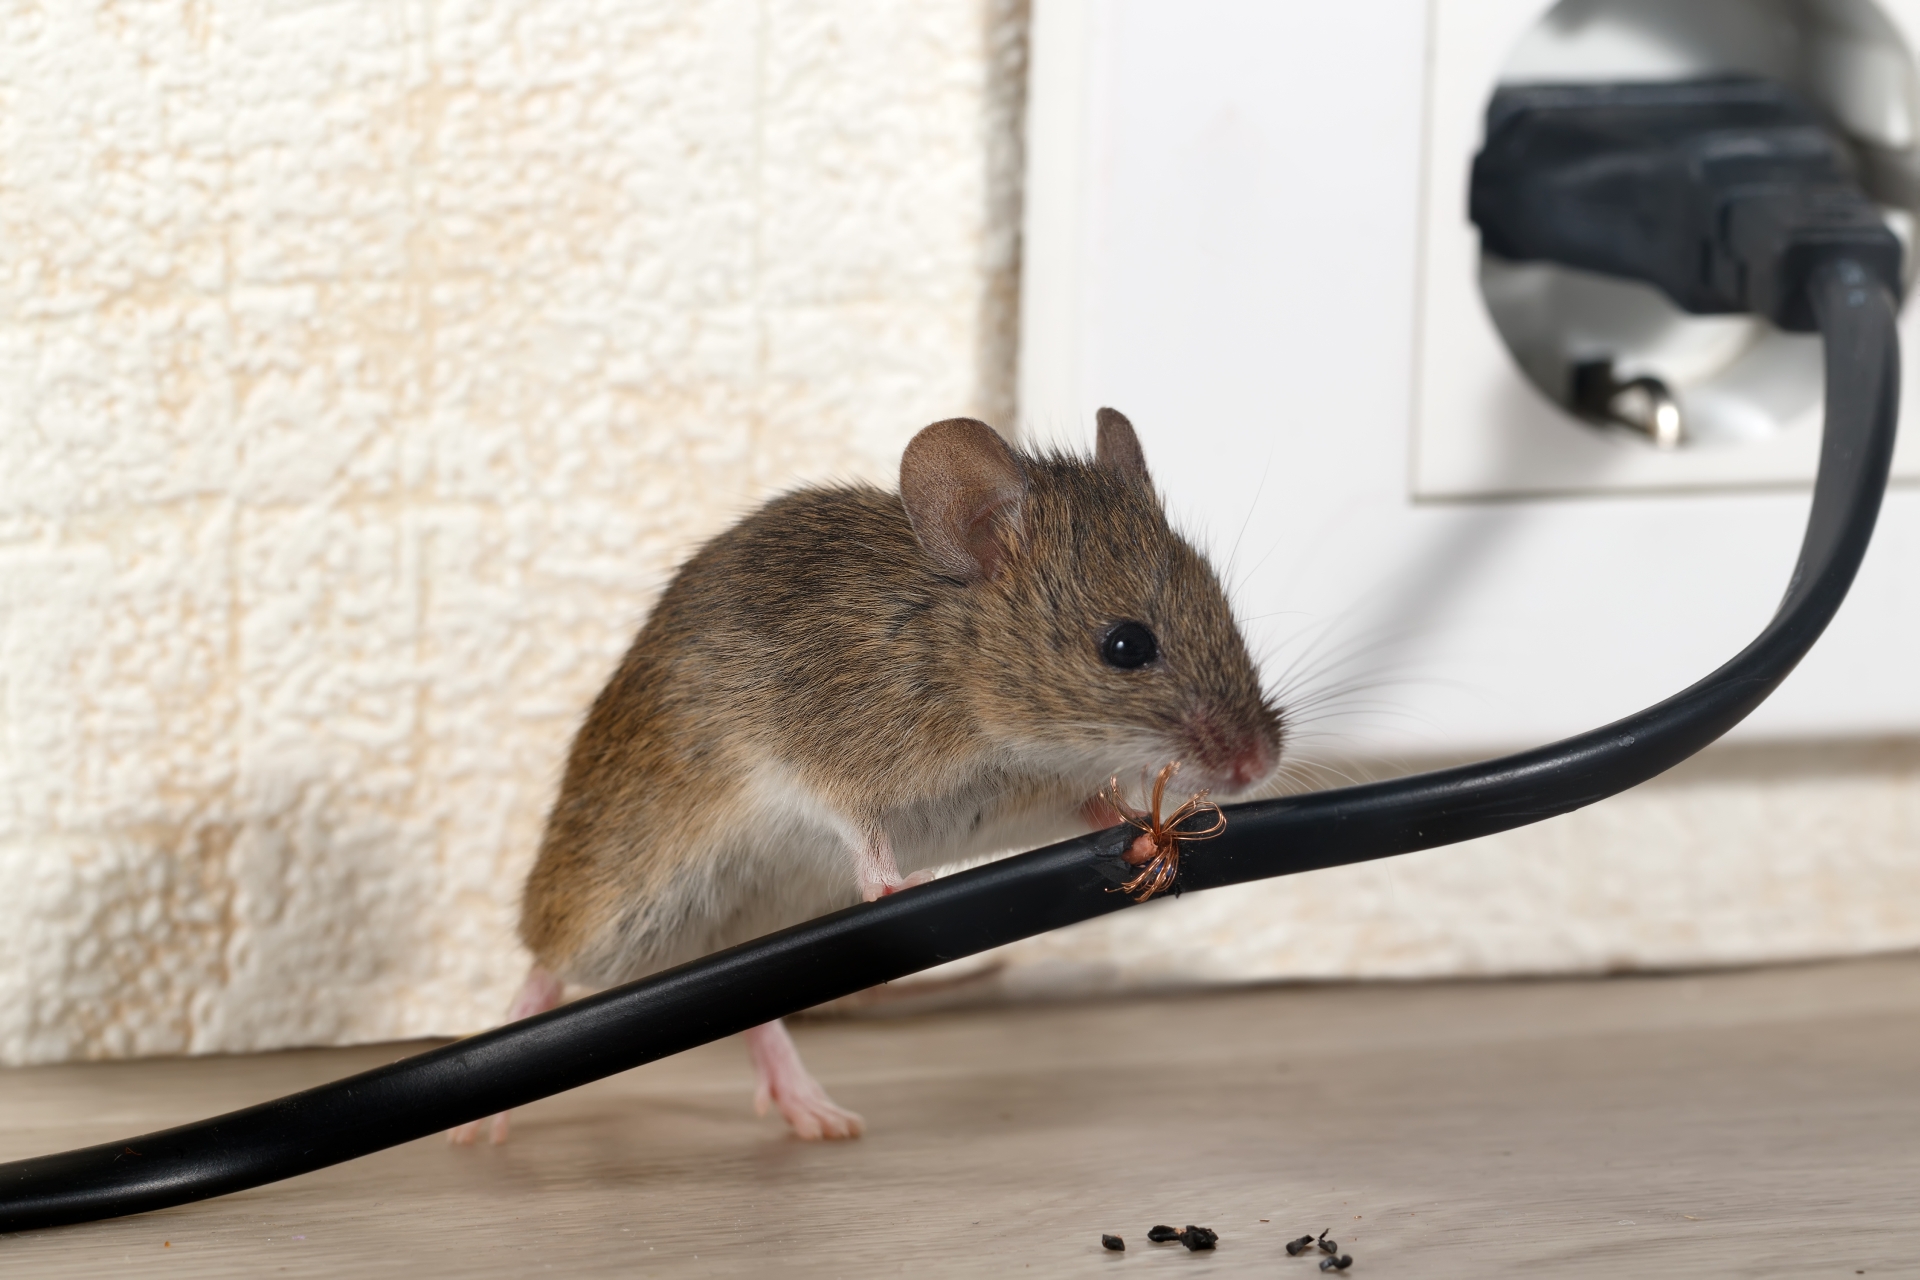 Mice Infestation, Pest Control in Forest Gate, Upton Park, E7. Call Now 020 8166 9746